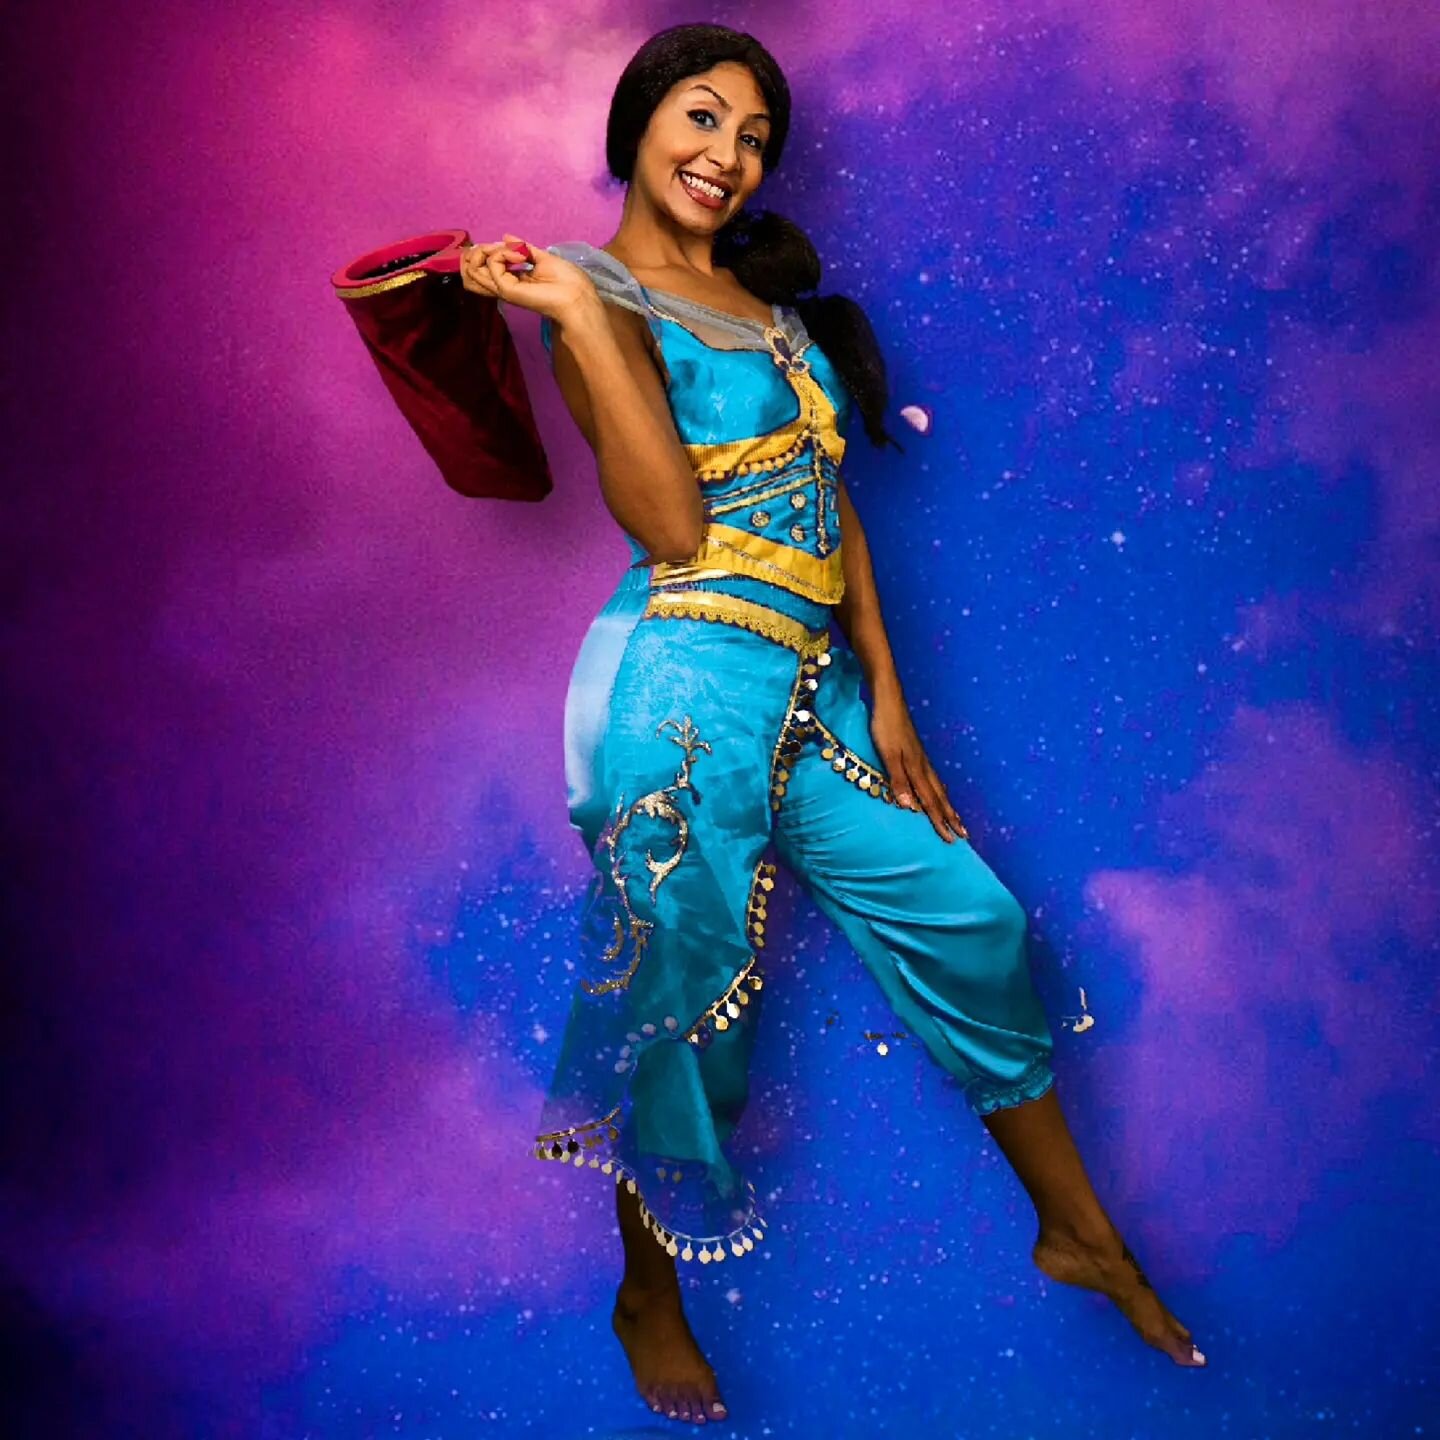 PRINCESS JASMINE 💚💙💜
.
In all of my parties I love to do a little Magic. The absolutely love my making things dissappear in my Magic bag. So much fun! 
.
Don't forget I also offer...
.

Magic, Balloon modelling, Pass the parcel, Bubbles, Dancing w